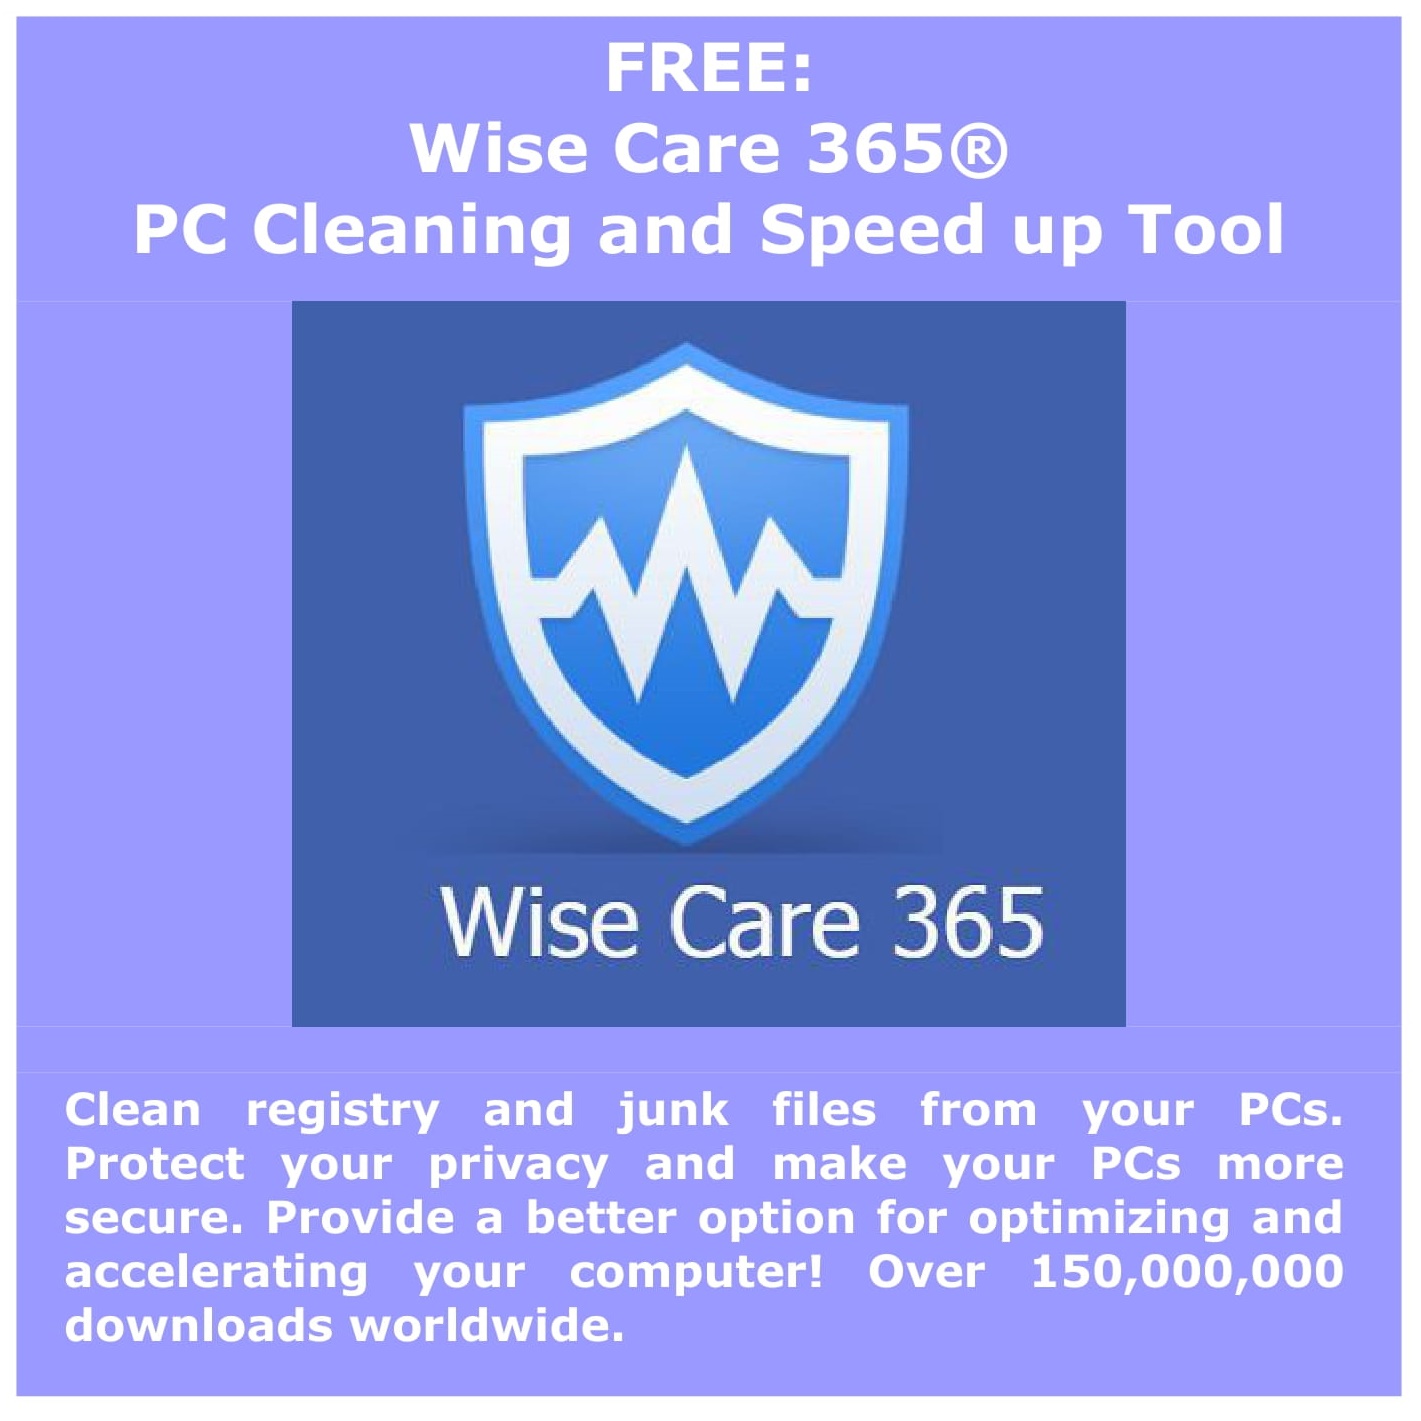 WISE CARE 365